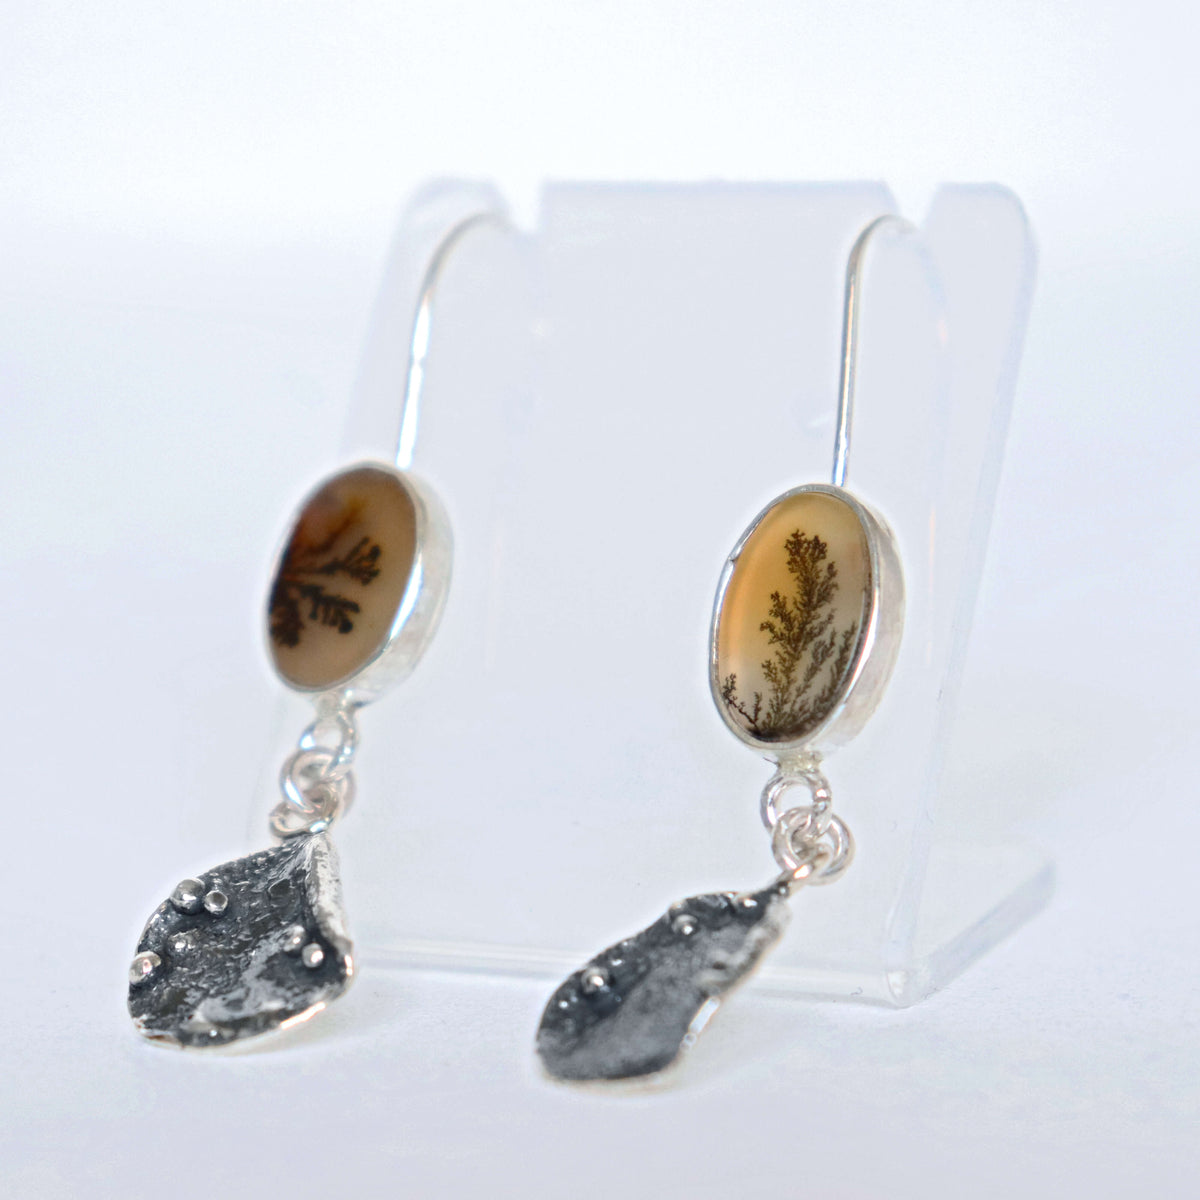 Dangle earrings with oxidized silver charms and moss agate, handcrafted by roffjewellery.com